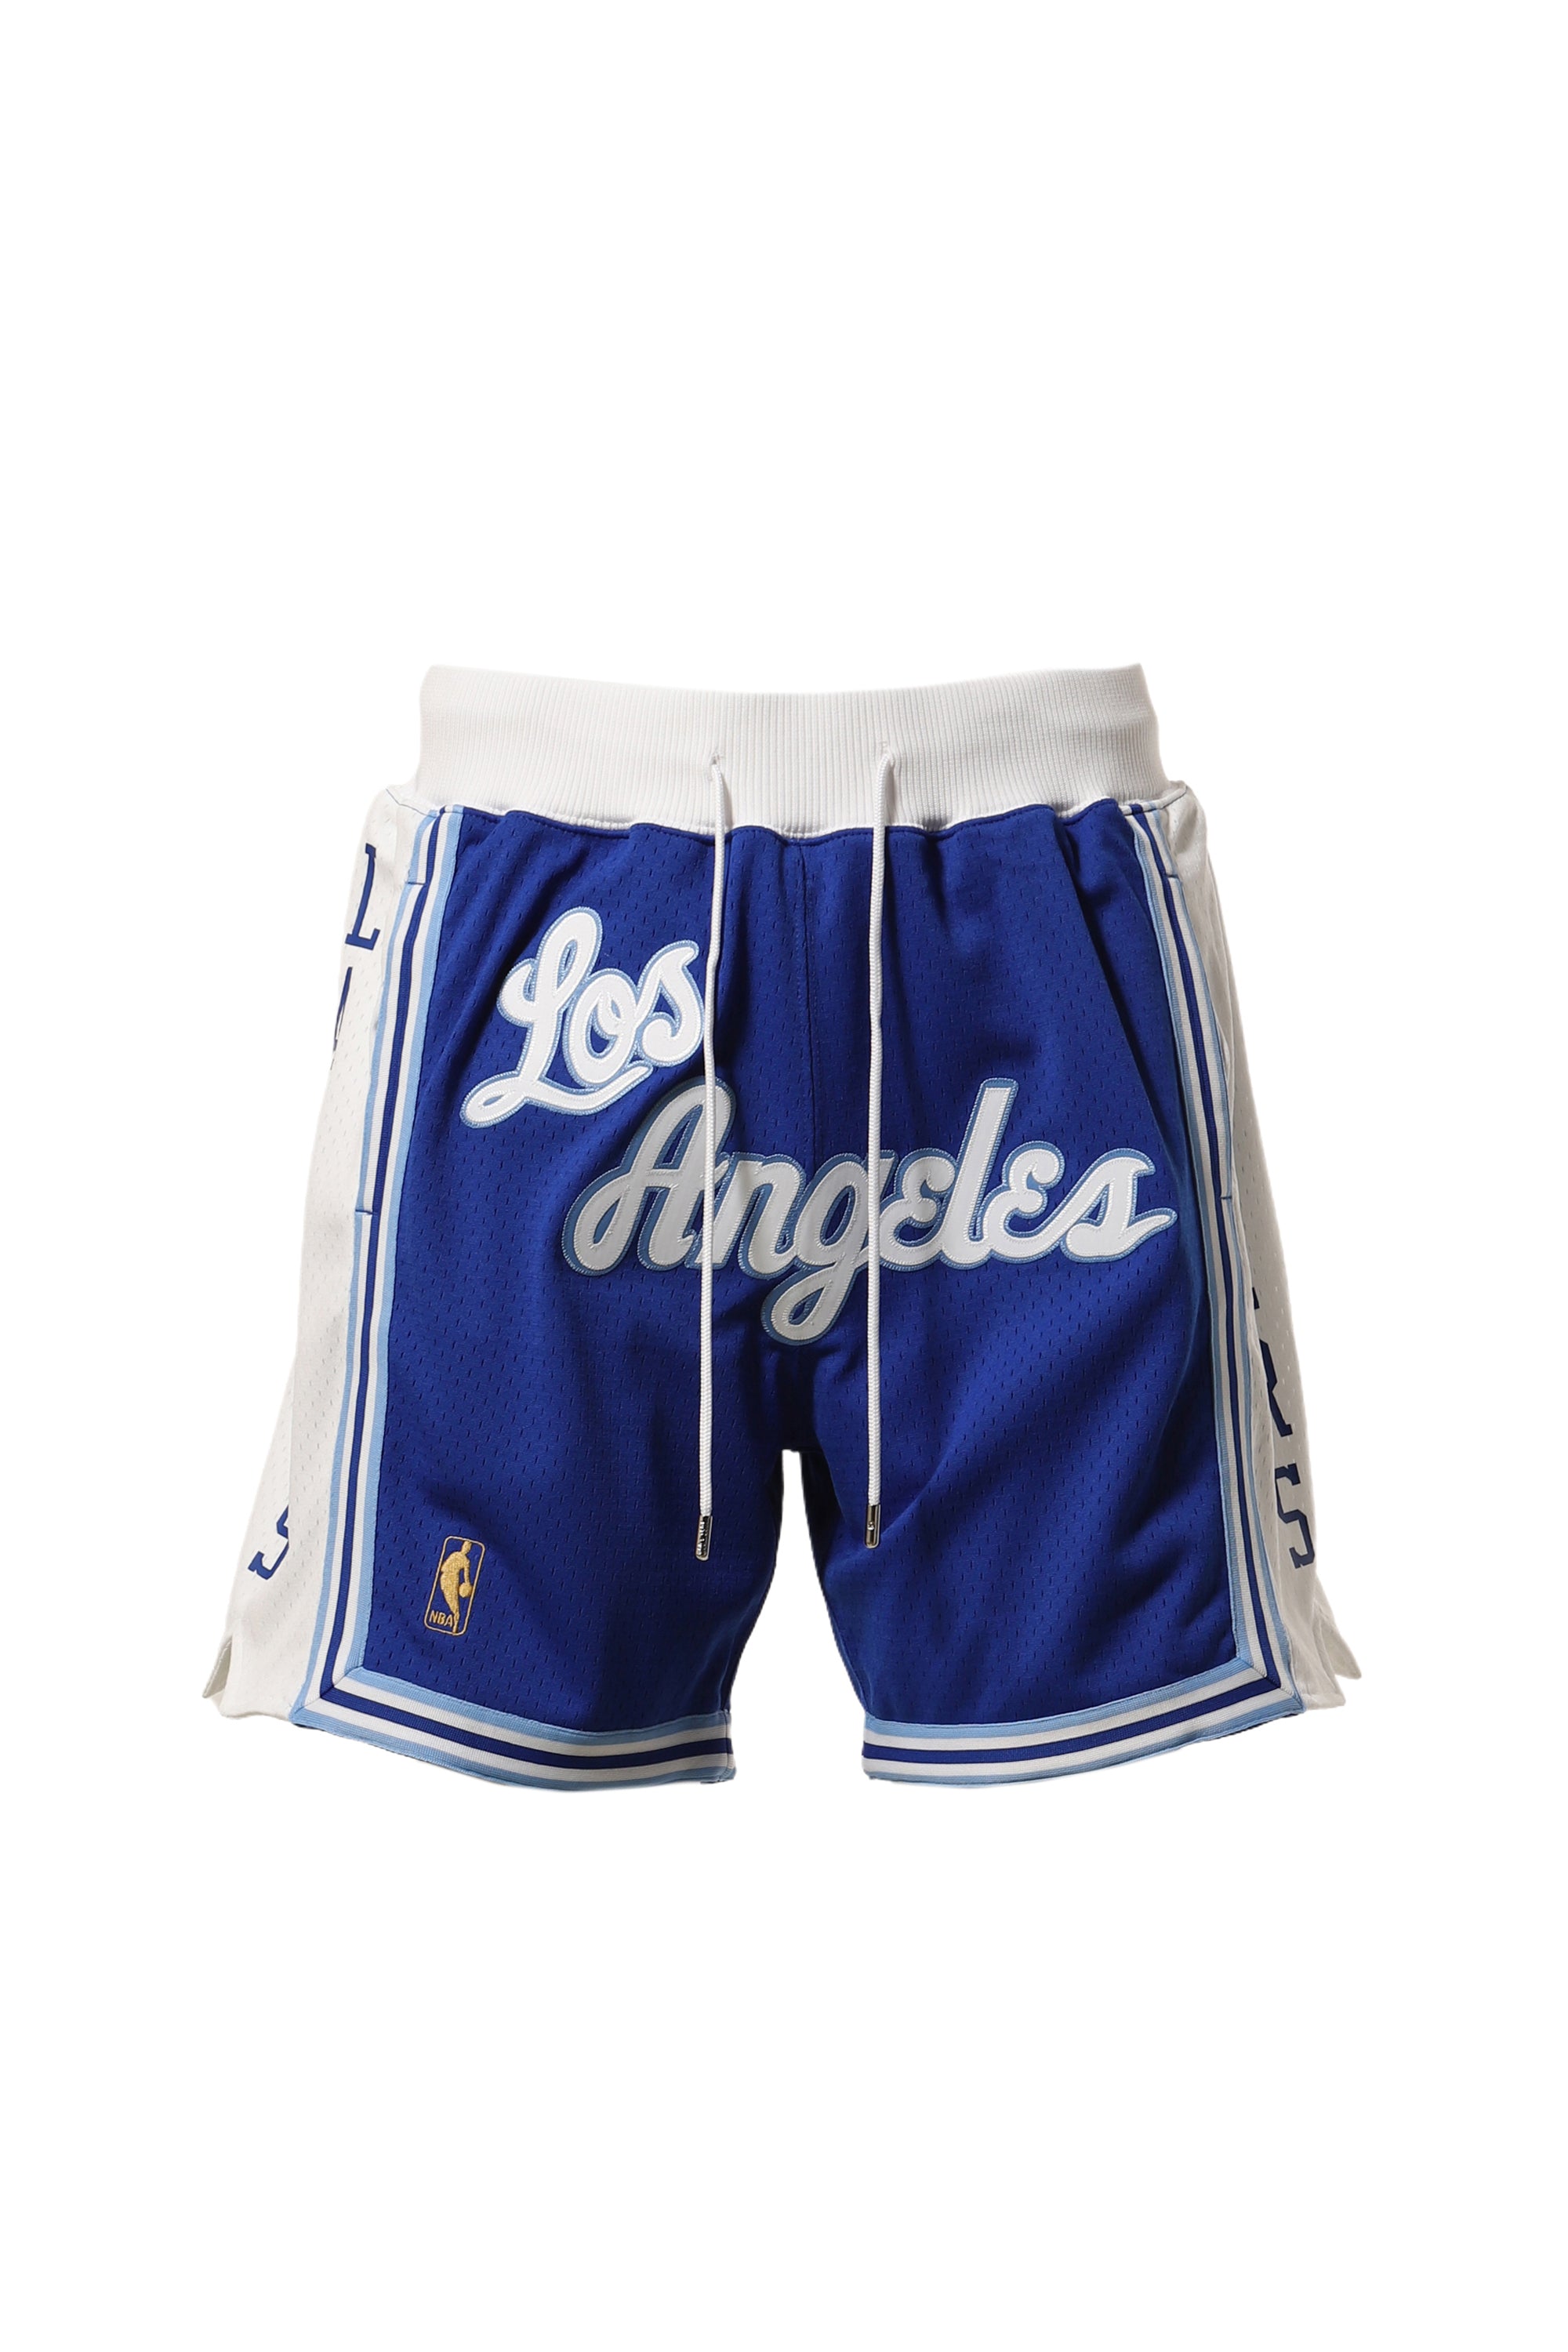 JUST DON ジャストドン SS24 NBA JUST DON BLUE 7 INCH SHORTS LAKERS / BLU - NUBIAN